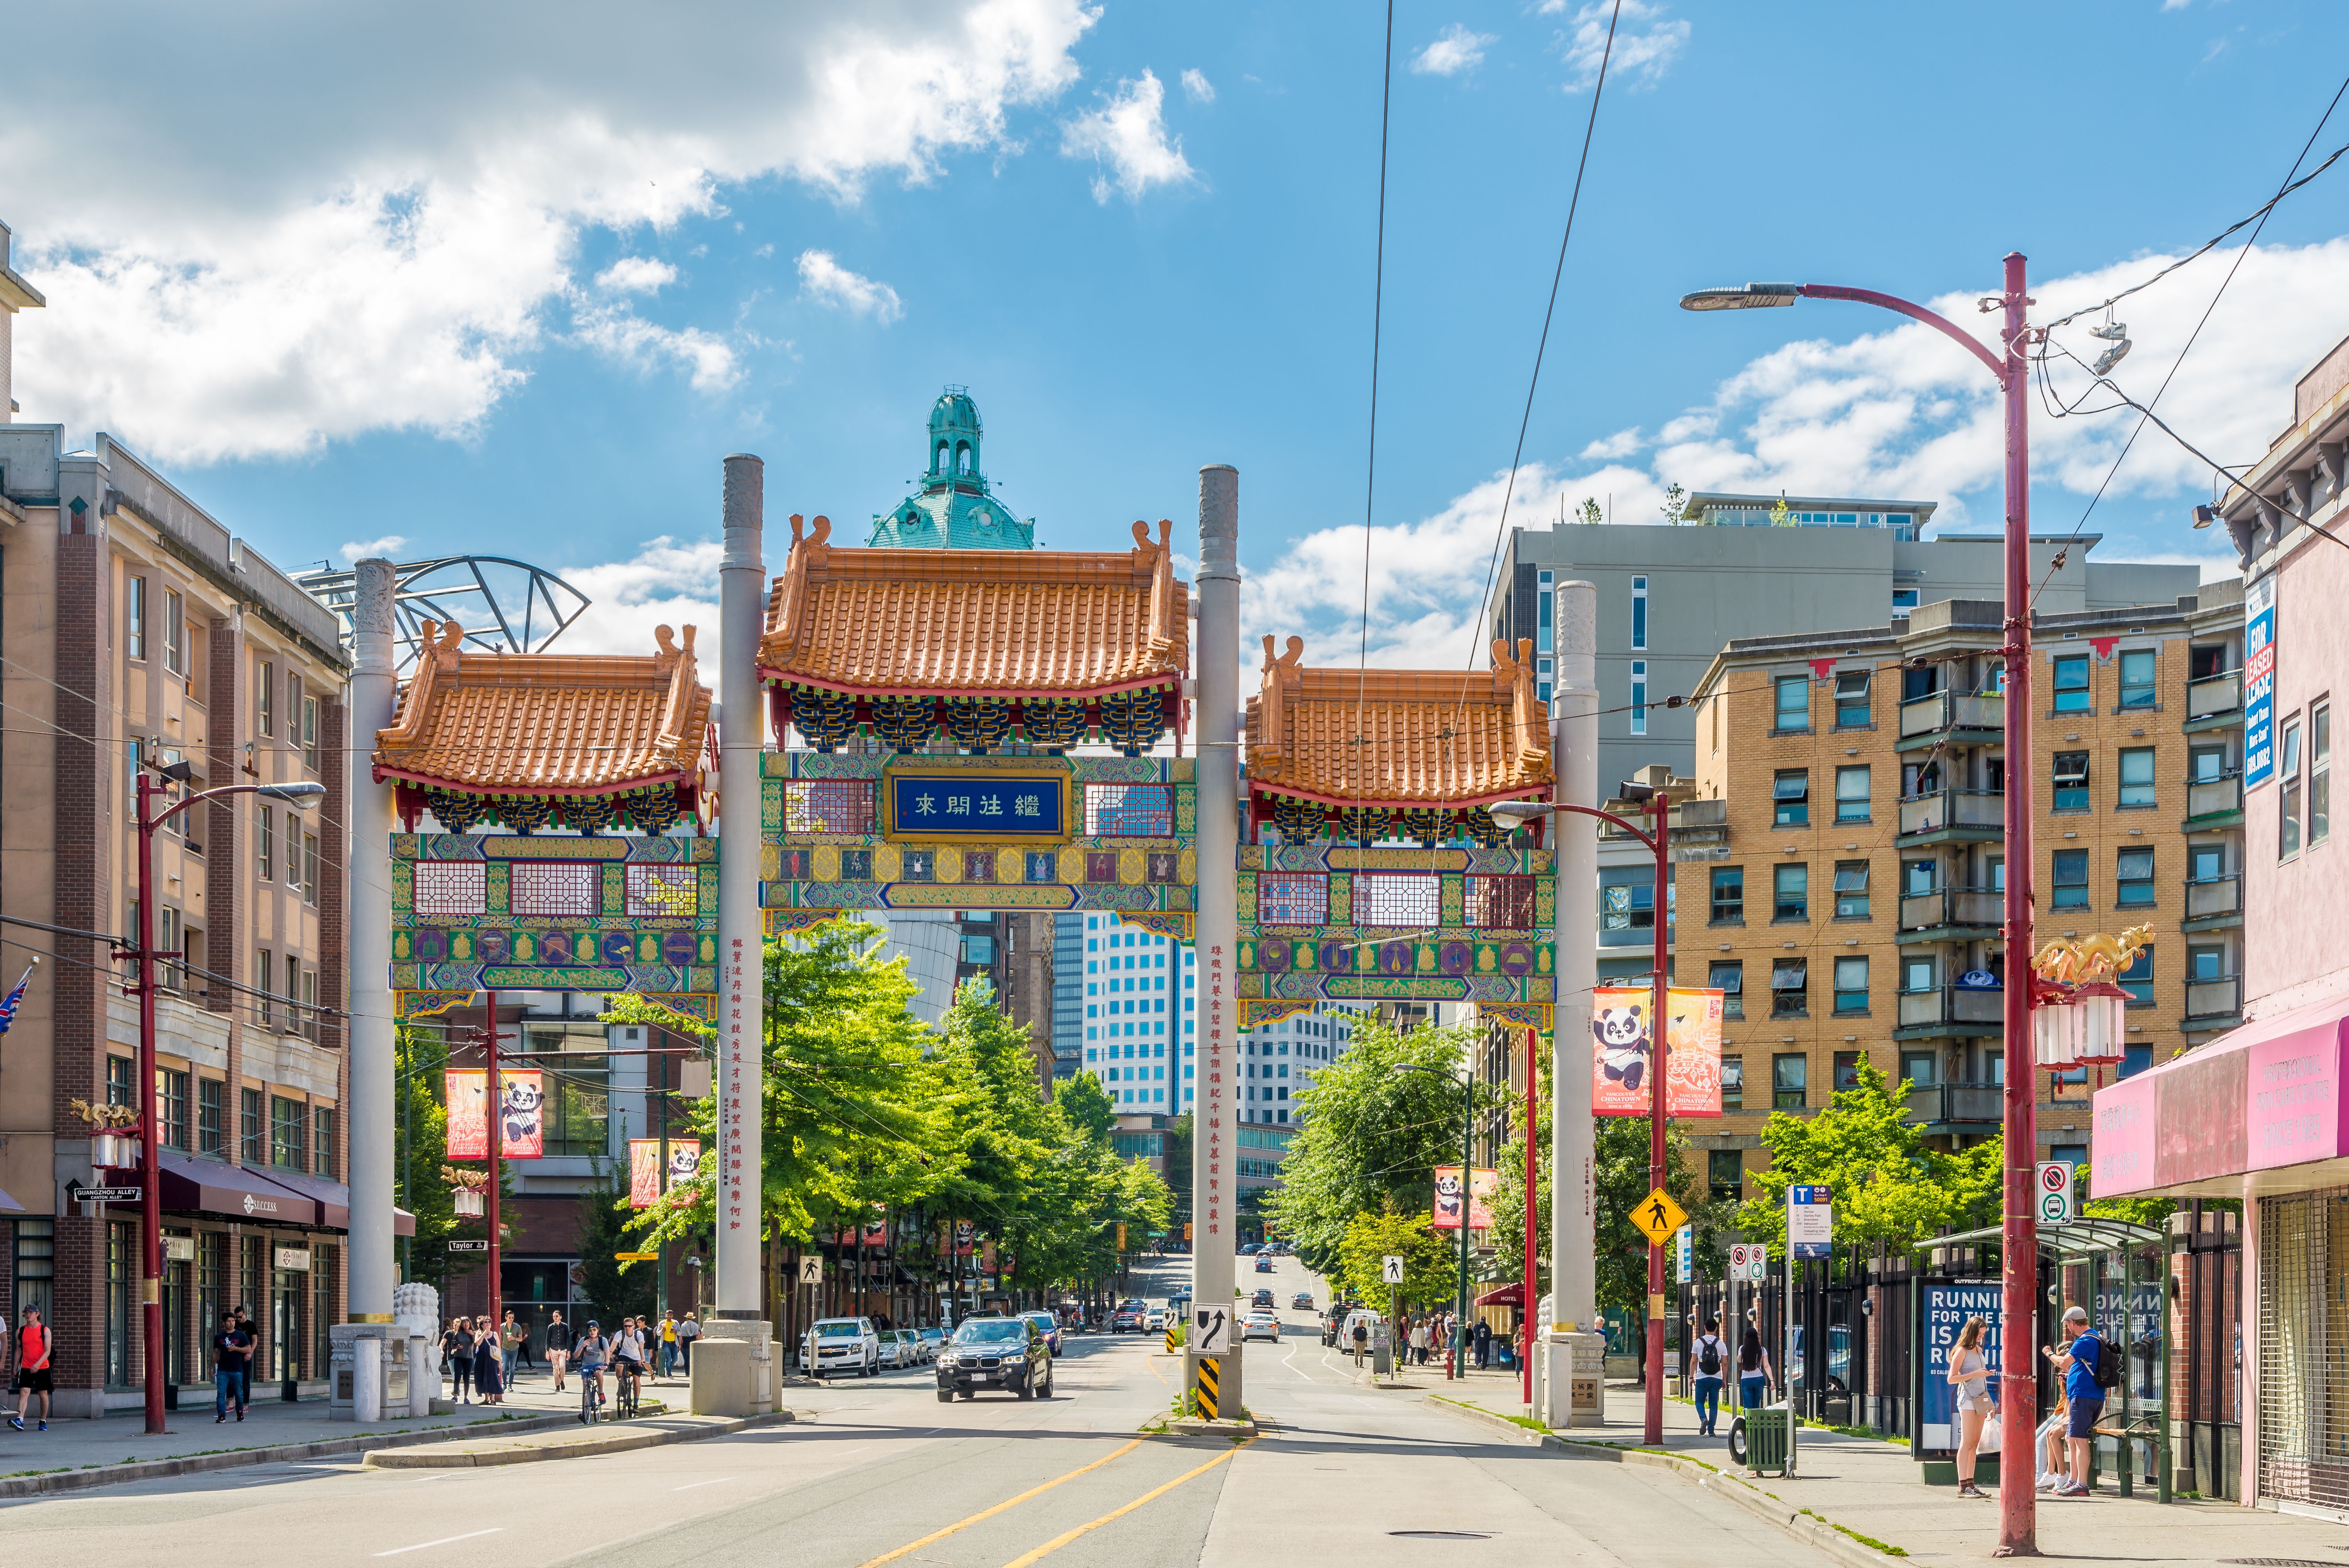 Gate to Chinatown in the streets of Vancouver